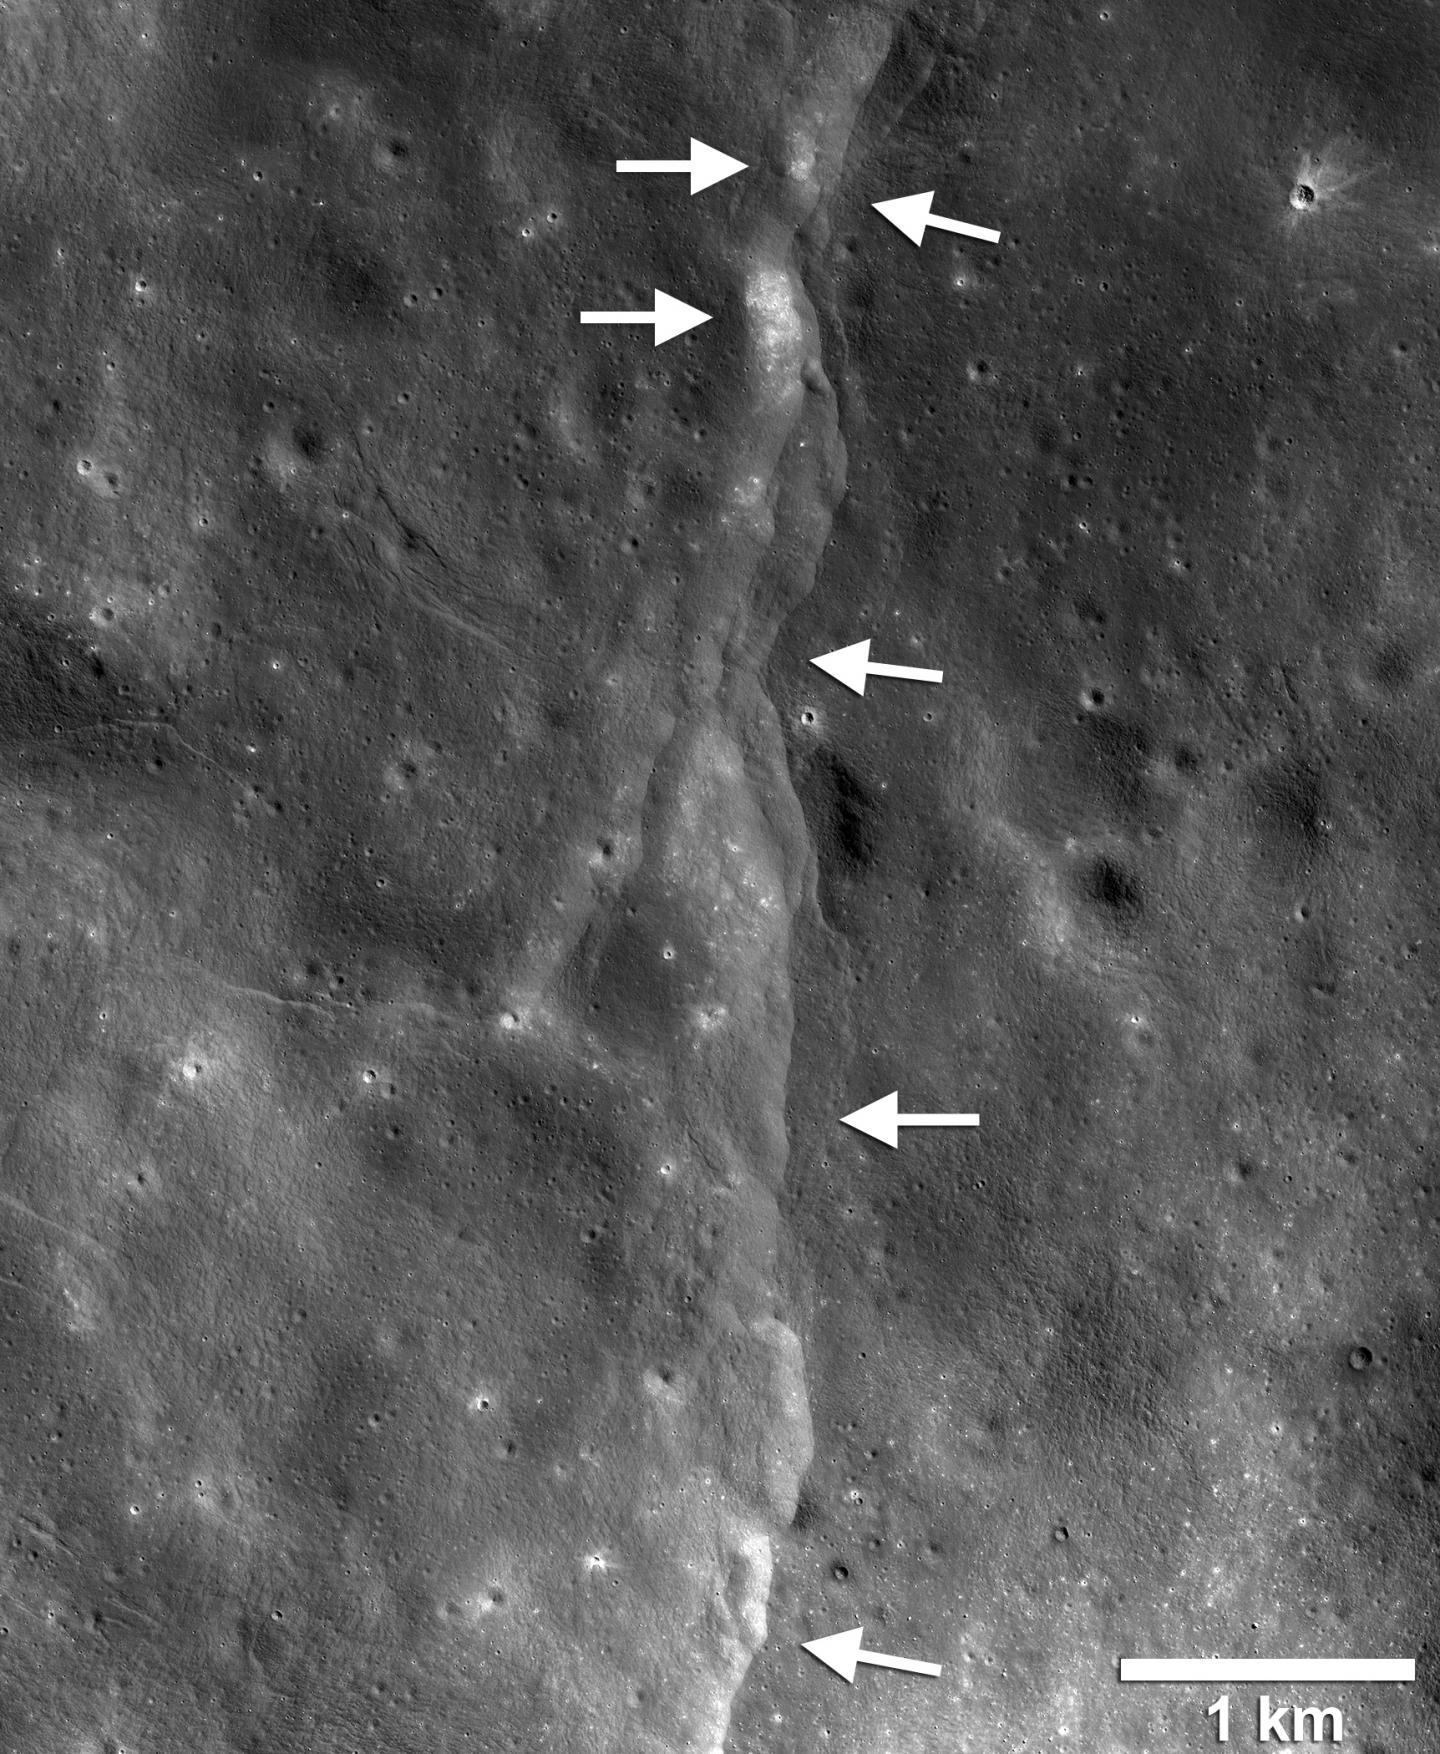 Moonquakes Rattle the Moon as It Shrinks Like a Raisin